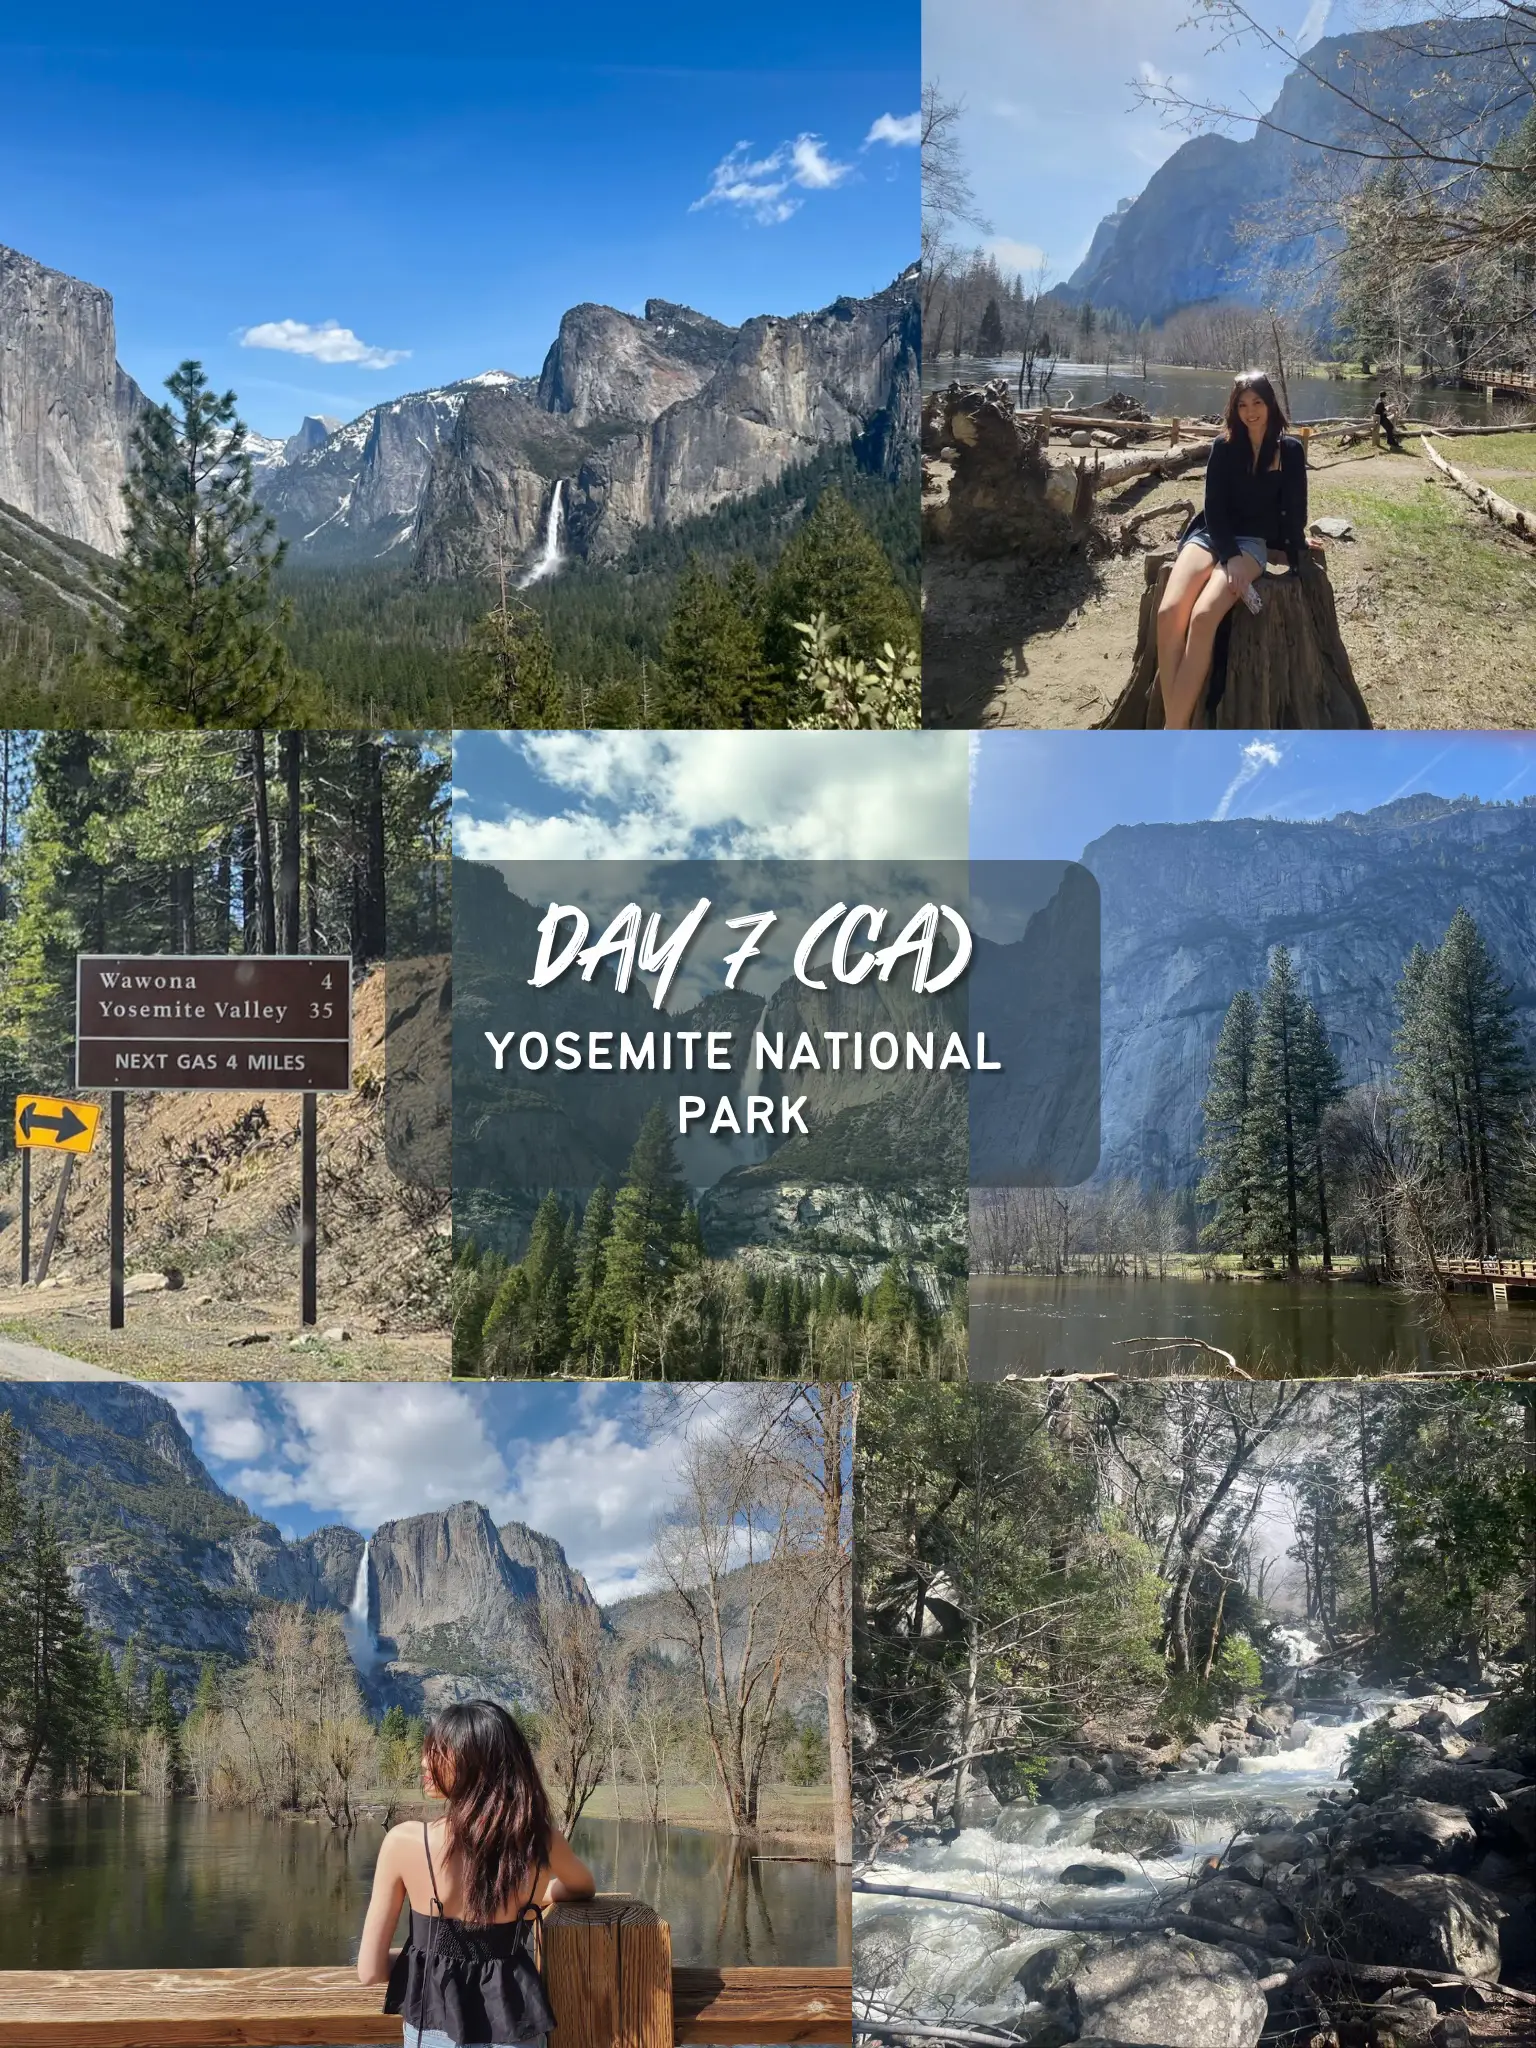 11 Cities, 3 States In 18 Days | 🇺🇸 FULL Itinerary 's images(2)